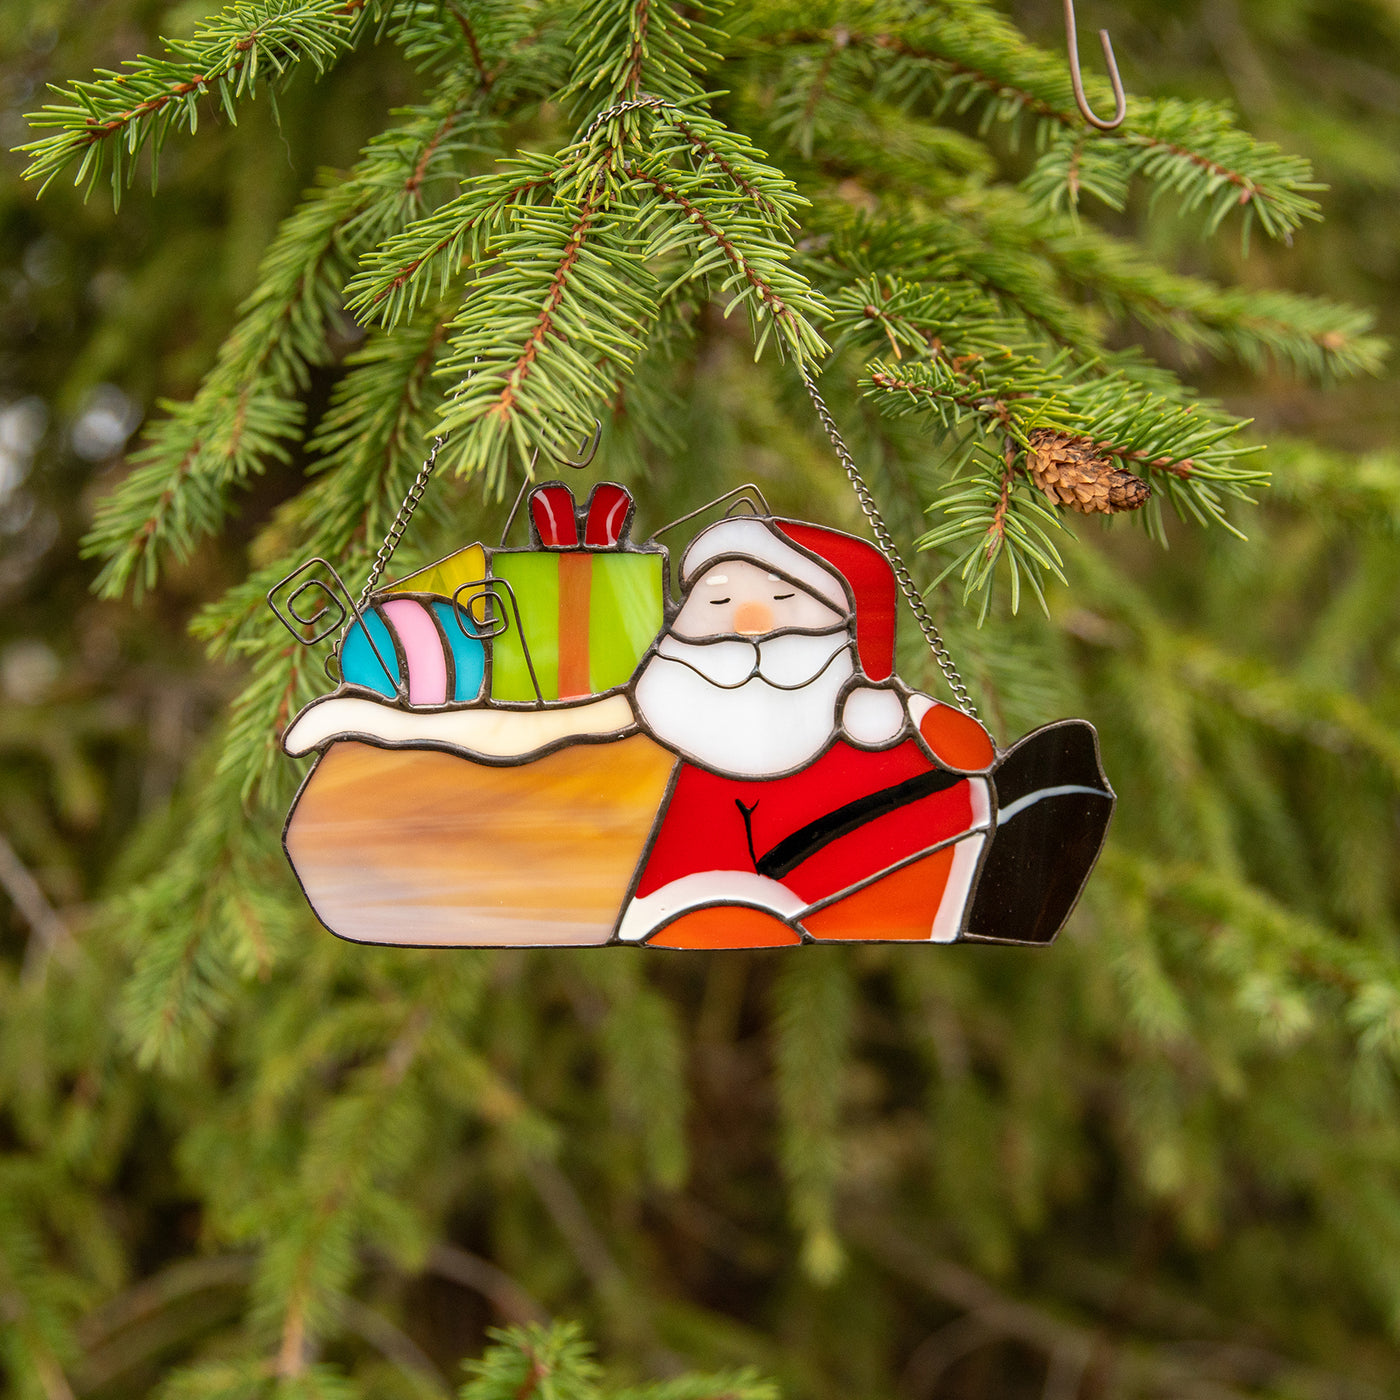 Stained glass Santa lying next to the gifts suncatcher used as a new year tree decoration